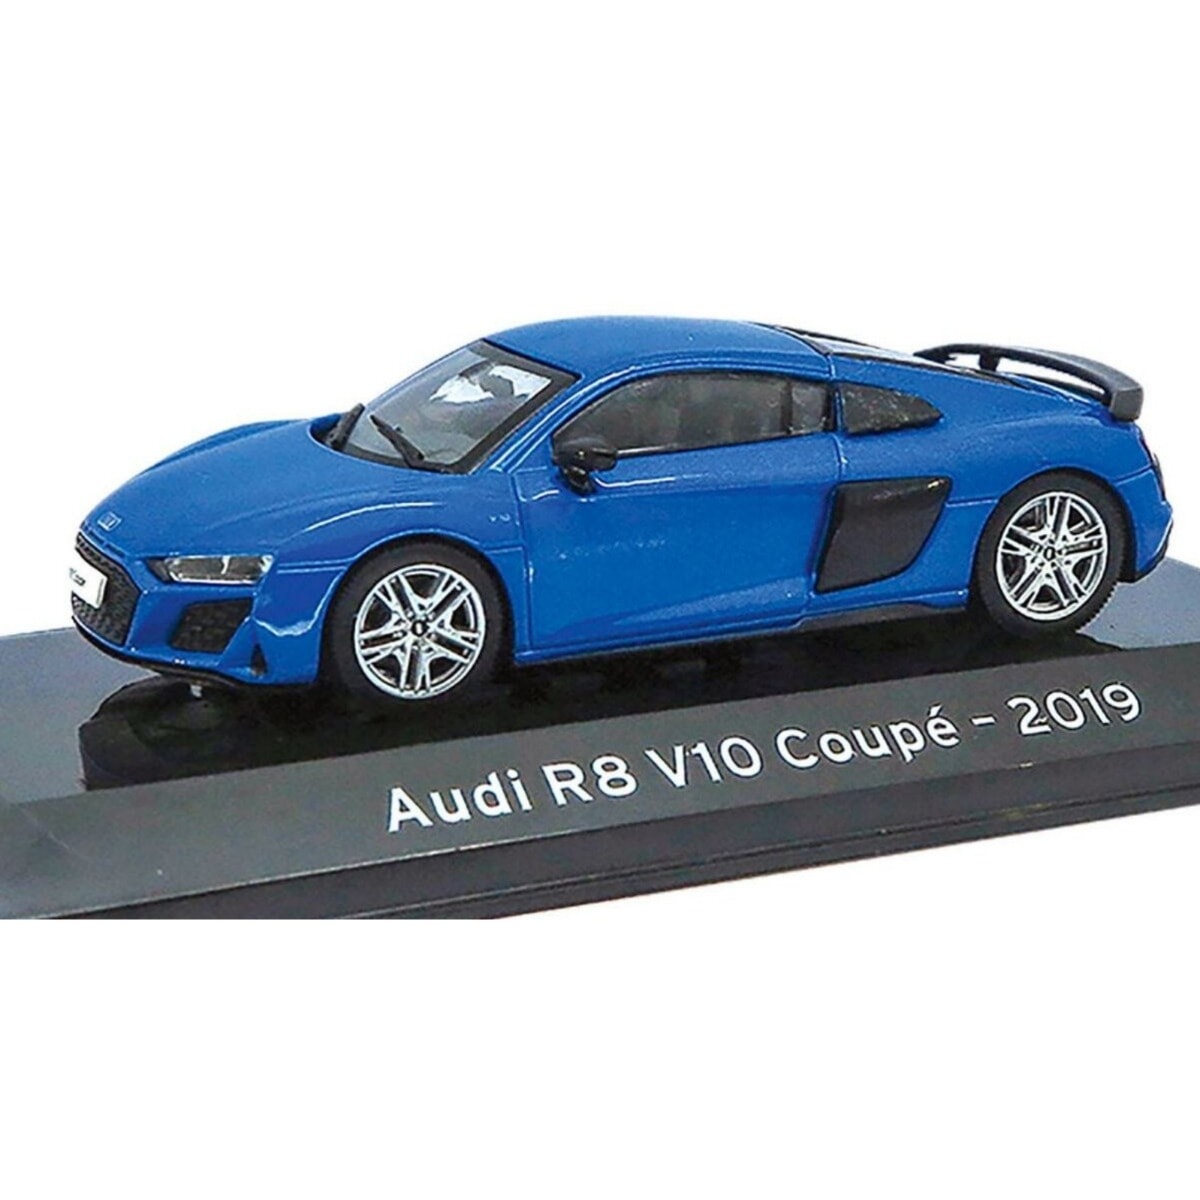 Audi R8 V10 Coupe Diecast Model 1:43 scale Blue Ex Mag